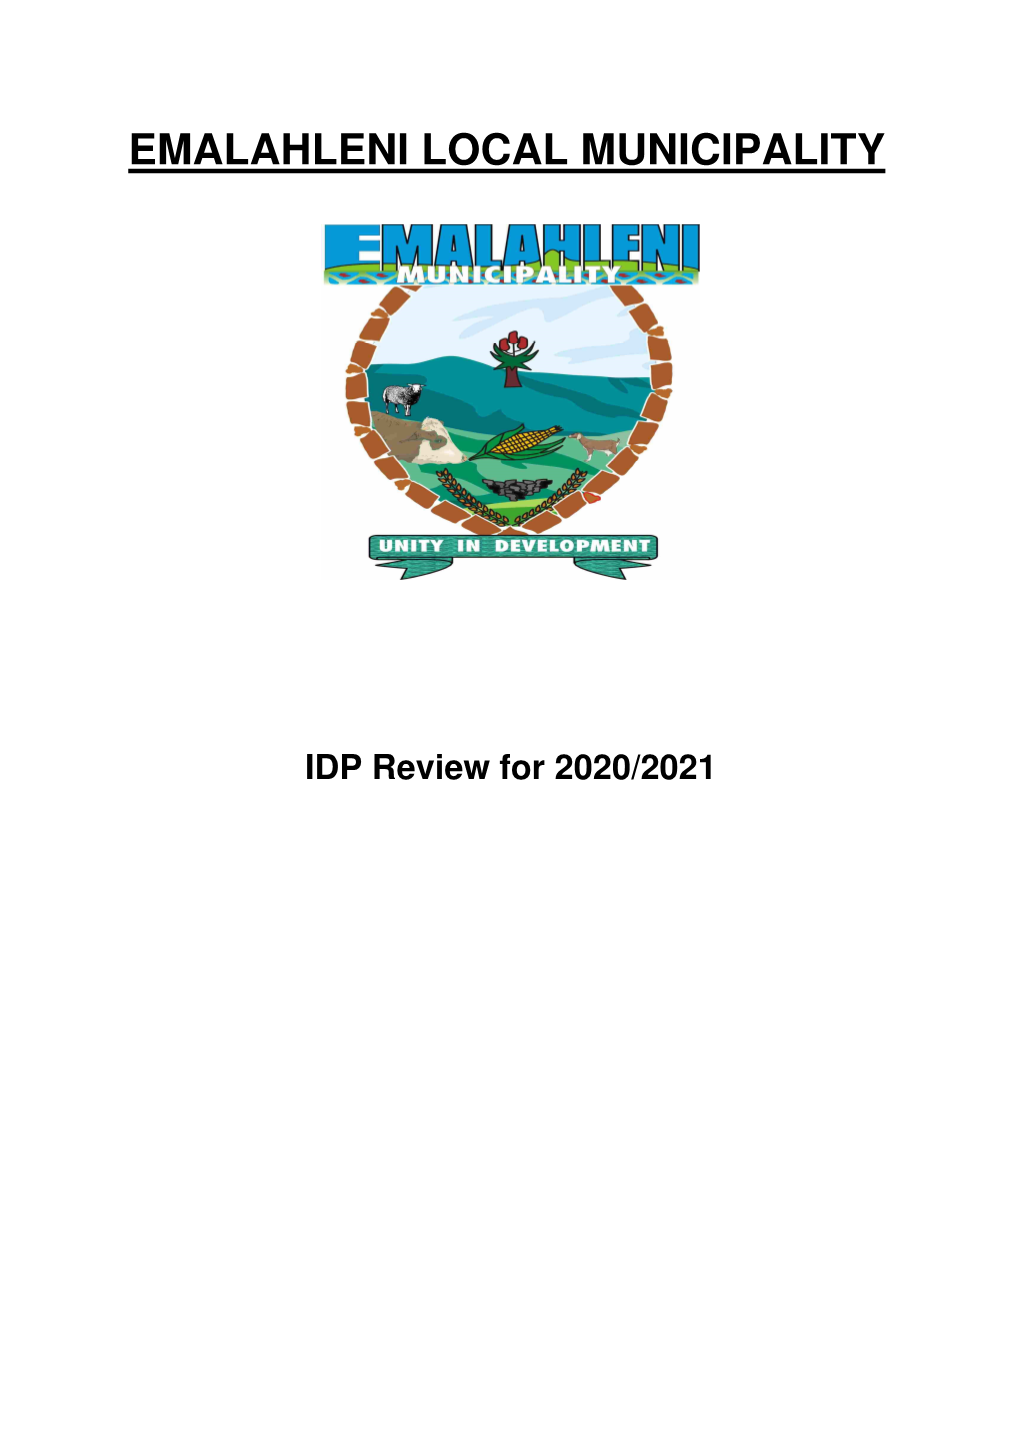 Emalahleni LM IDP Review for 2020-2021